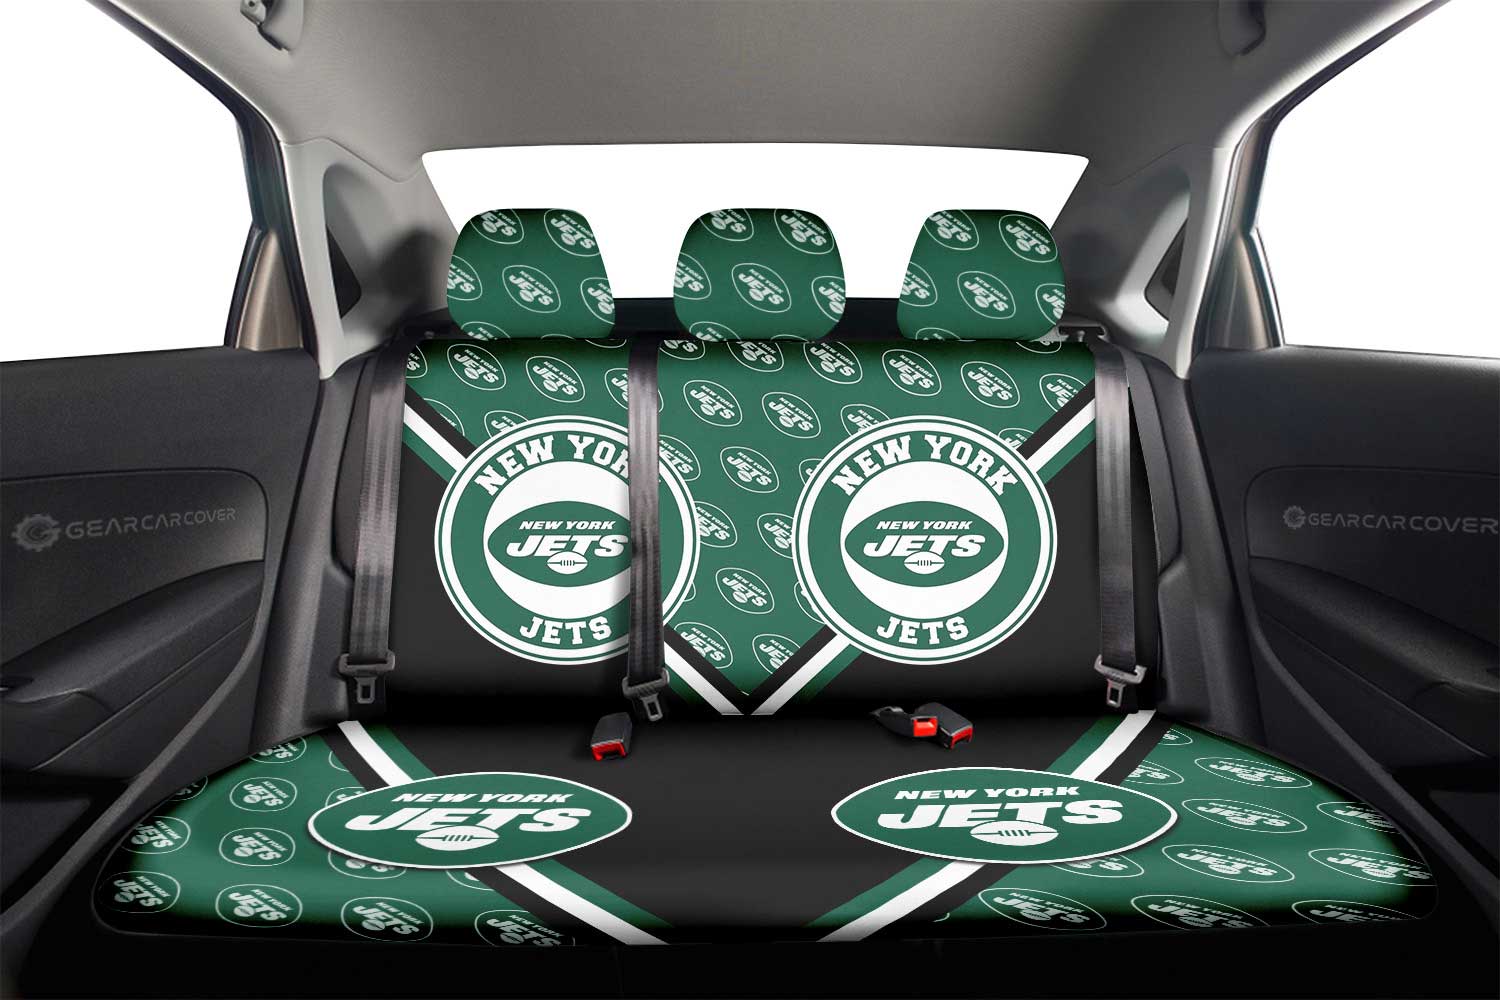 New York Jets Car Back Seat Cover Custom Car Decorations For Fans - Gearcarcover - 2